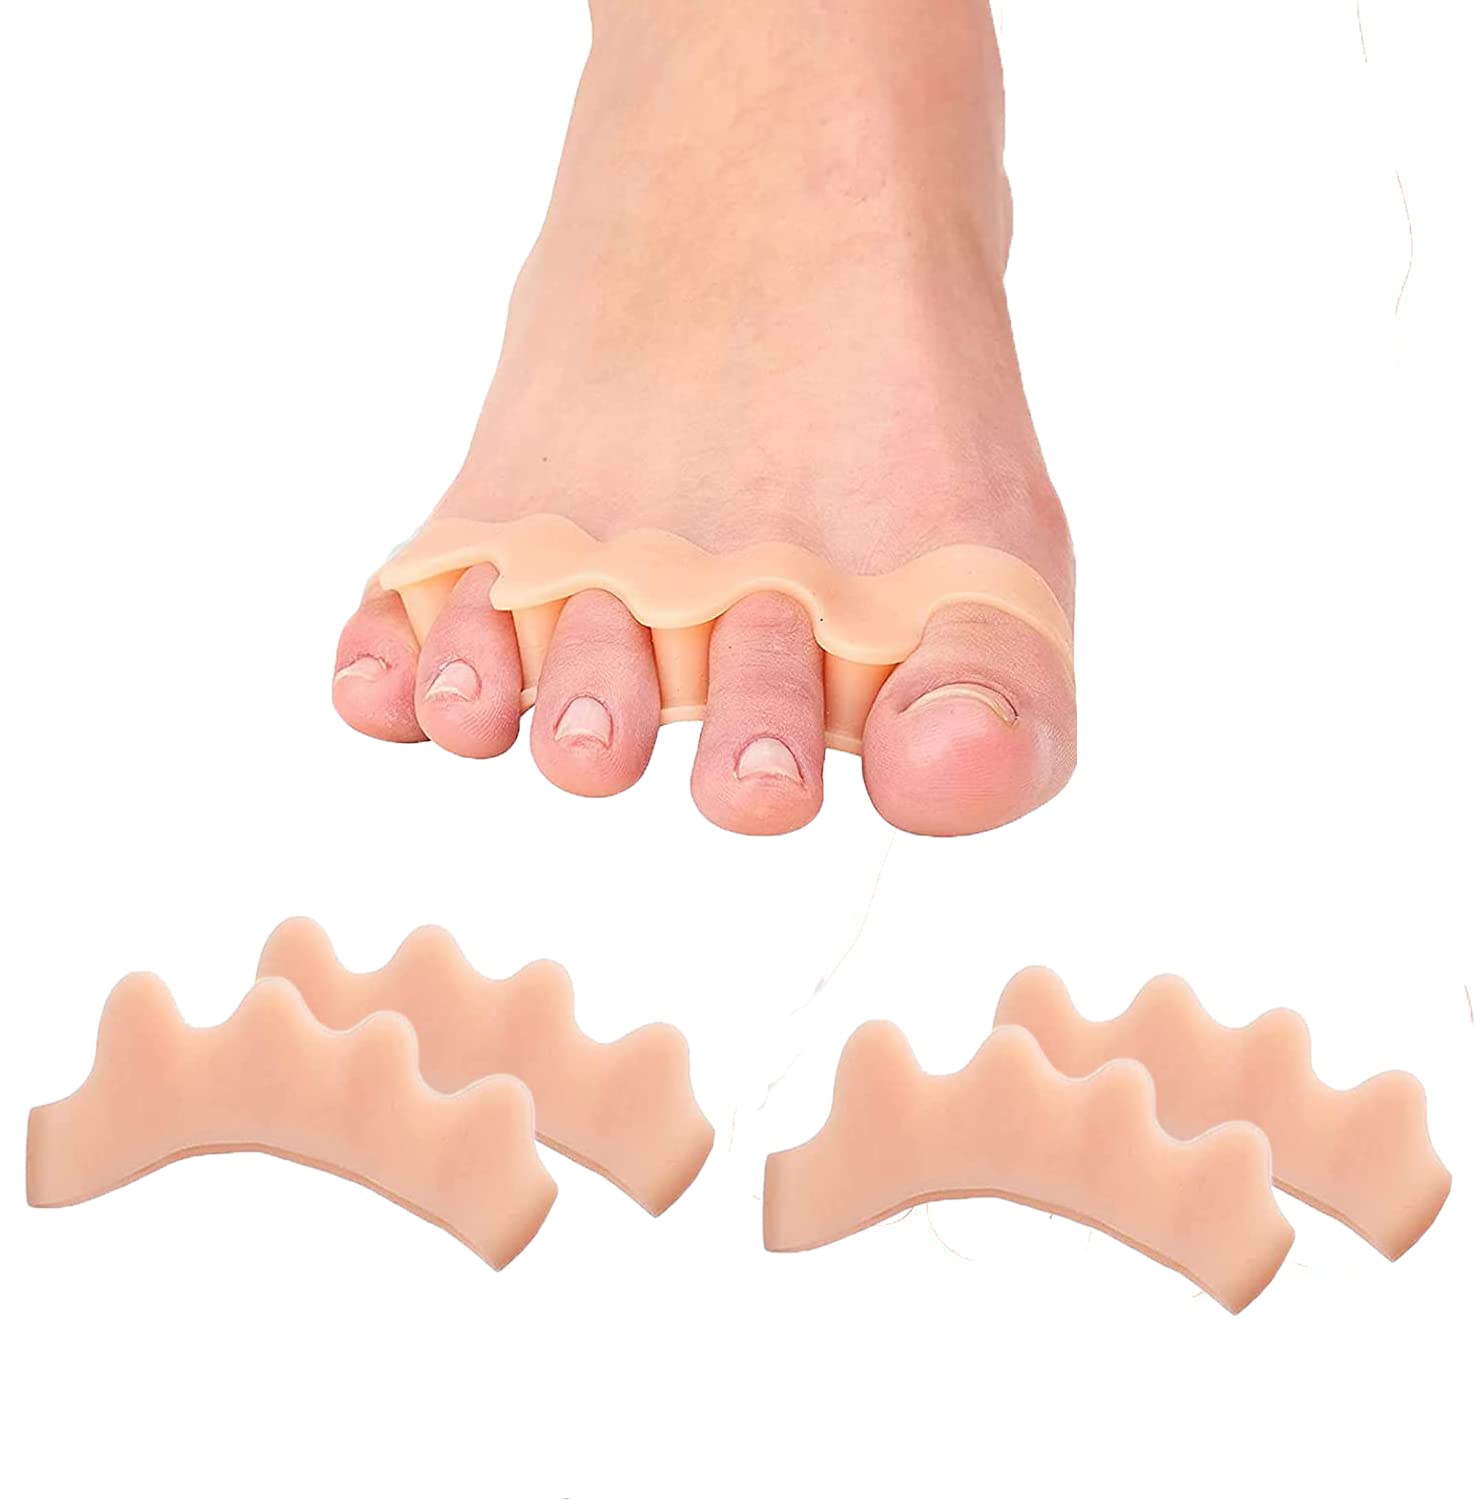 Yoga Toe Separator at Rs 430/piece